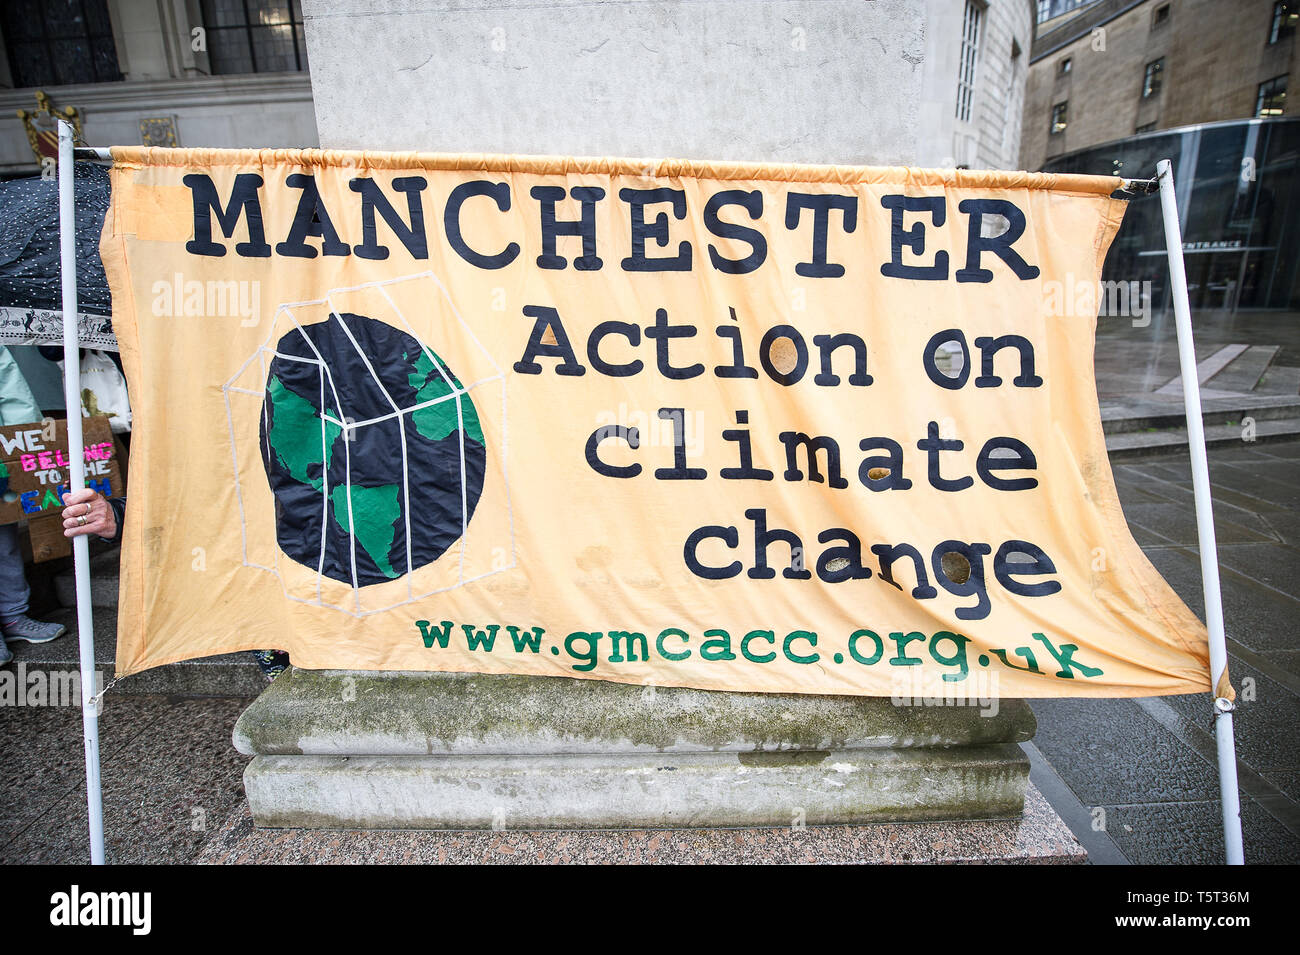 Manchester Action on Climate Change banner seen during the weekly Extinction Rebellion protest outside Manchester Central Library. Extinction Rebellion is a socio-political movement which uses nonviolent resistance to protest against climate breakdown, biodiversity loss, and the risk of human extinction and ecological collapse. Stock Photo